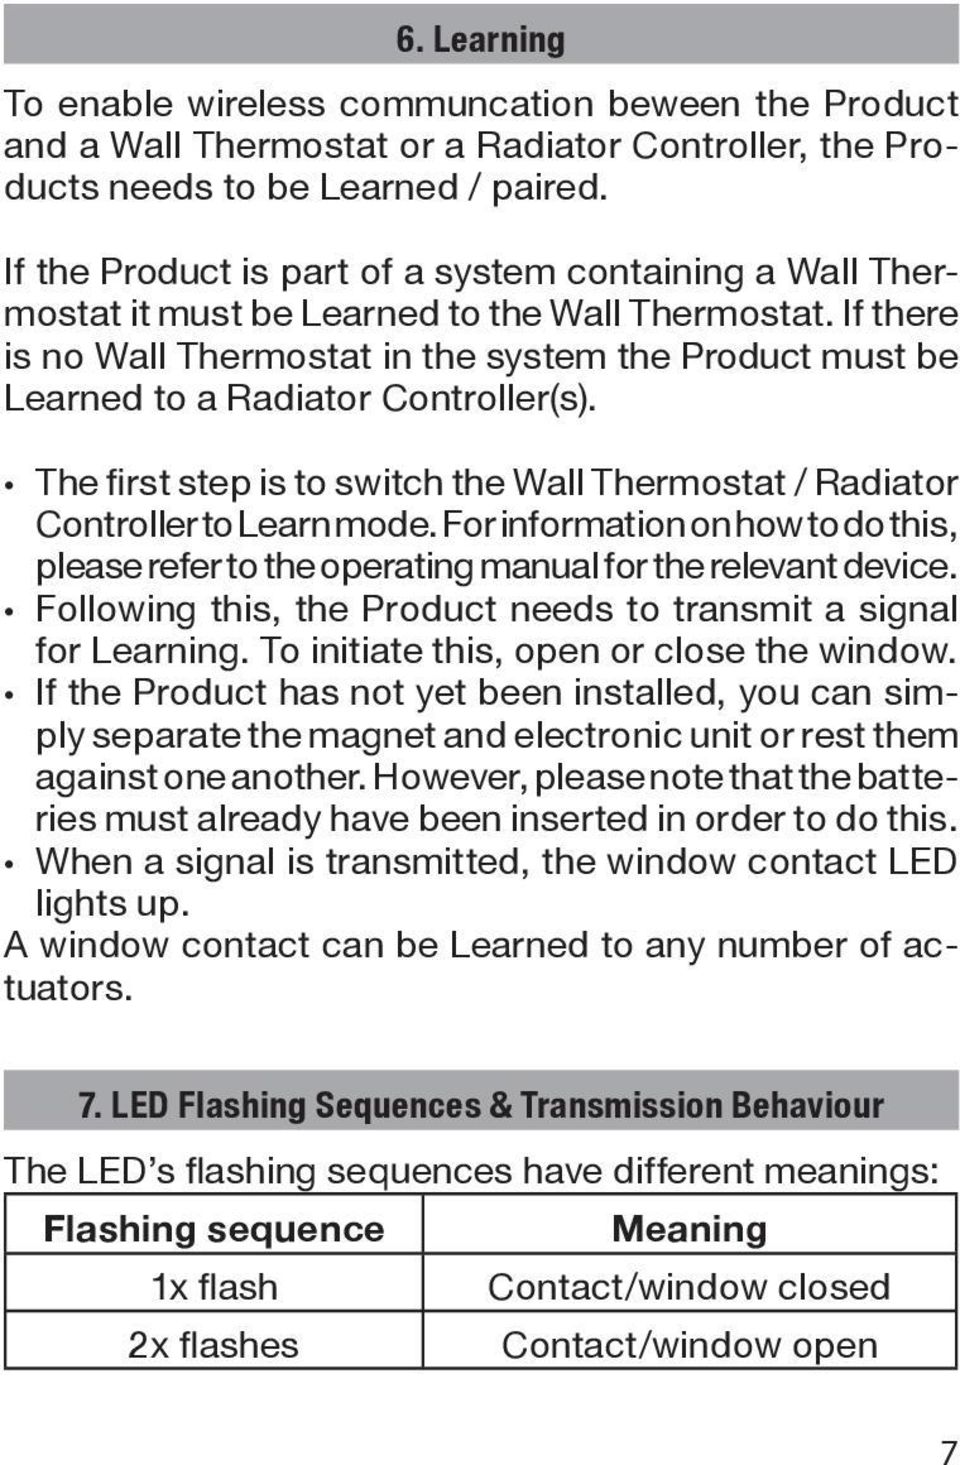 If there is no Wall Thermostat in the system the Product must be Learned to a Radiator Controller(s). The first step is to switch the Wall Thermostat / Radiator Controller to Learn mode.